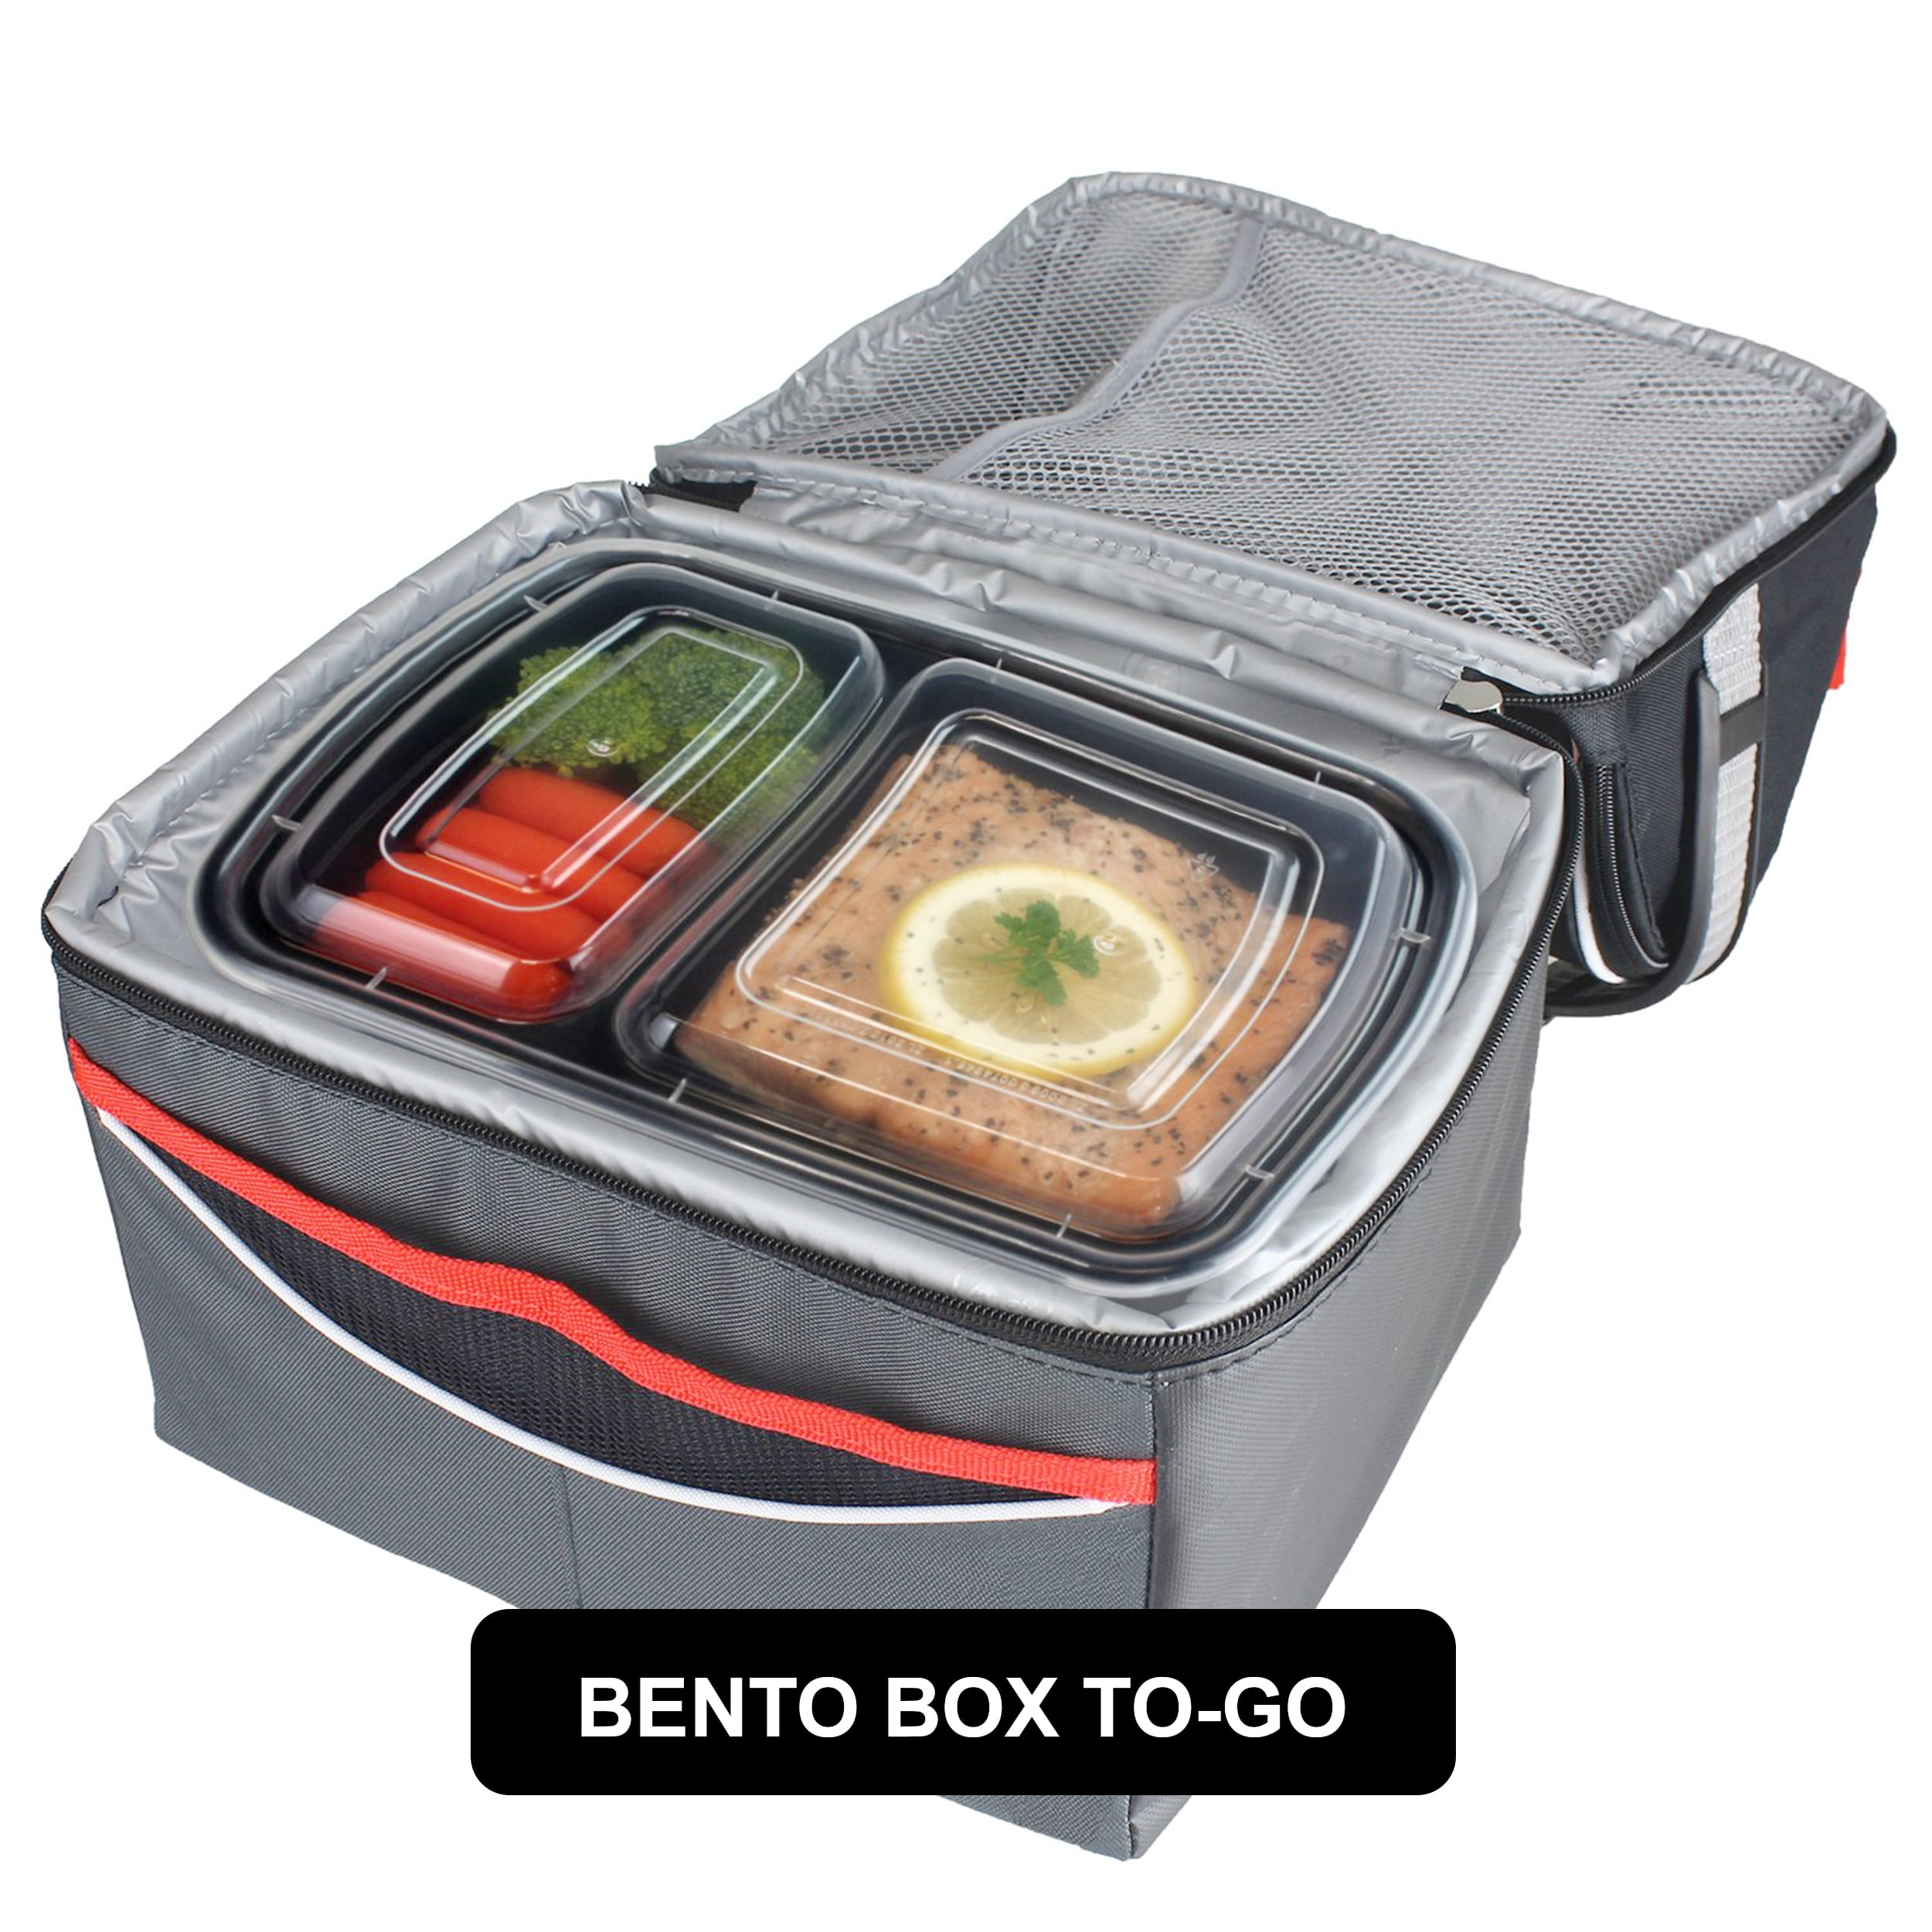 OTOR Bento box Meal Prep Containers with Clear Airtight Lids 17oz Lunch  Boxes Deli Container take away food storage Two-color process 25 Sets